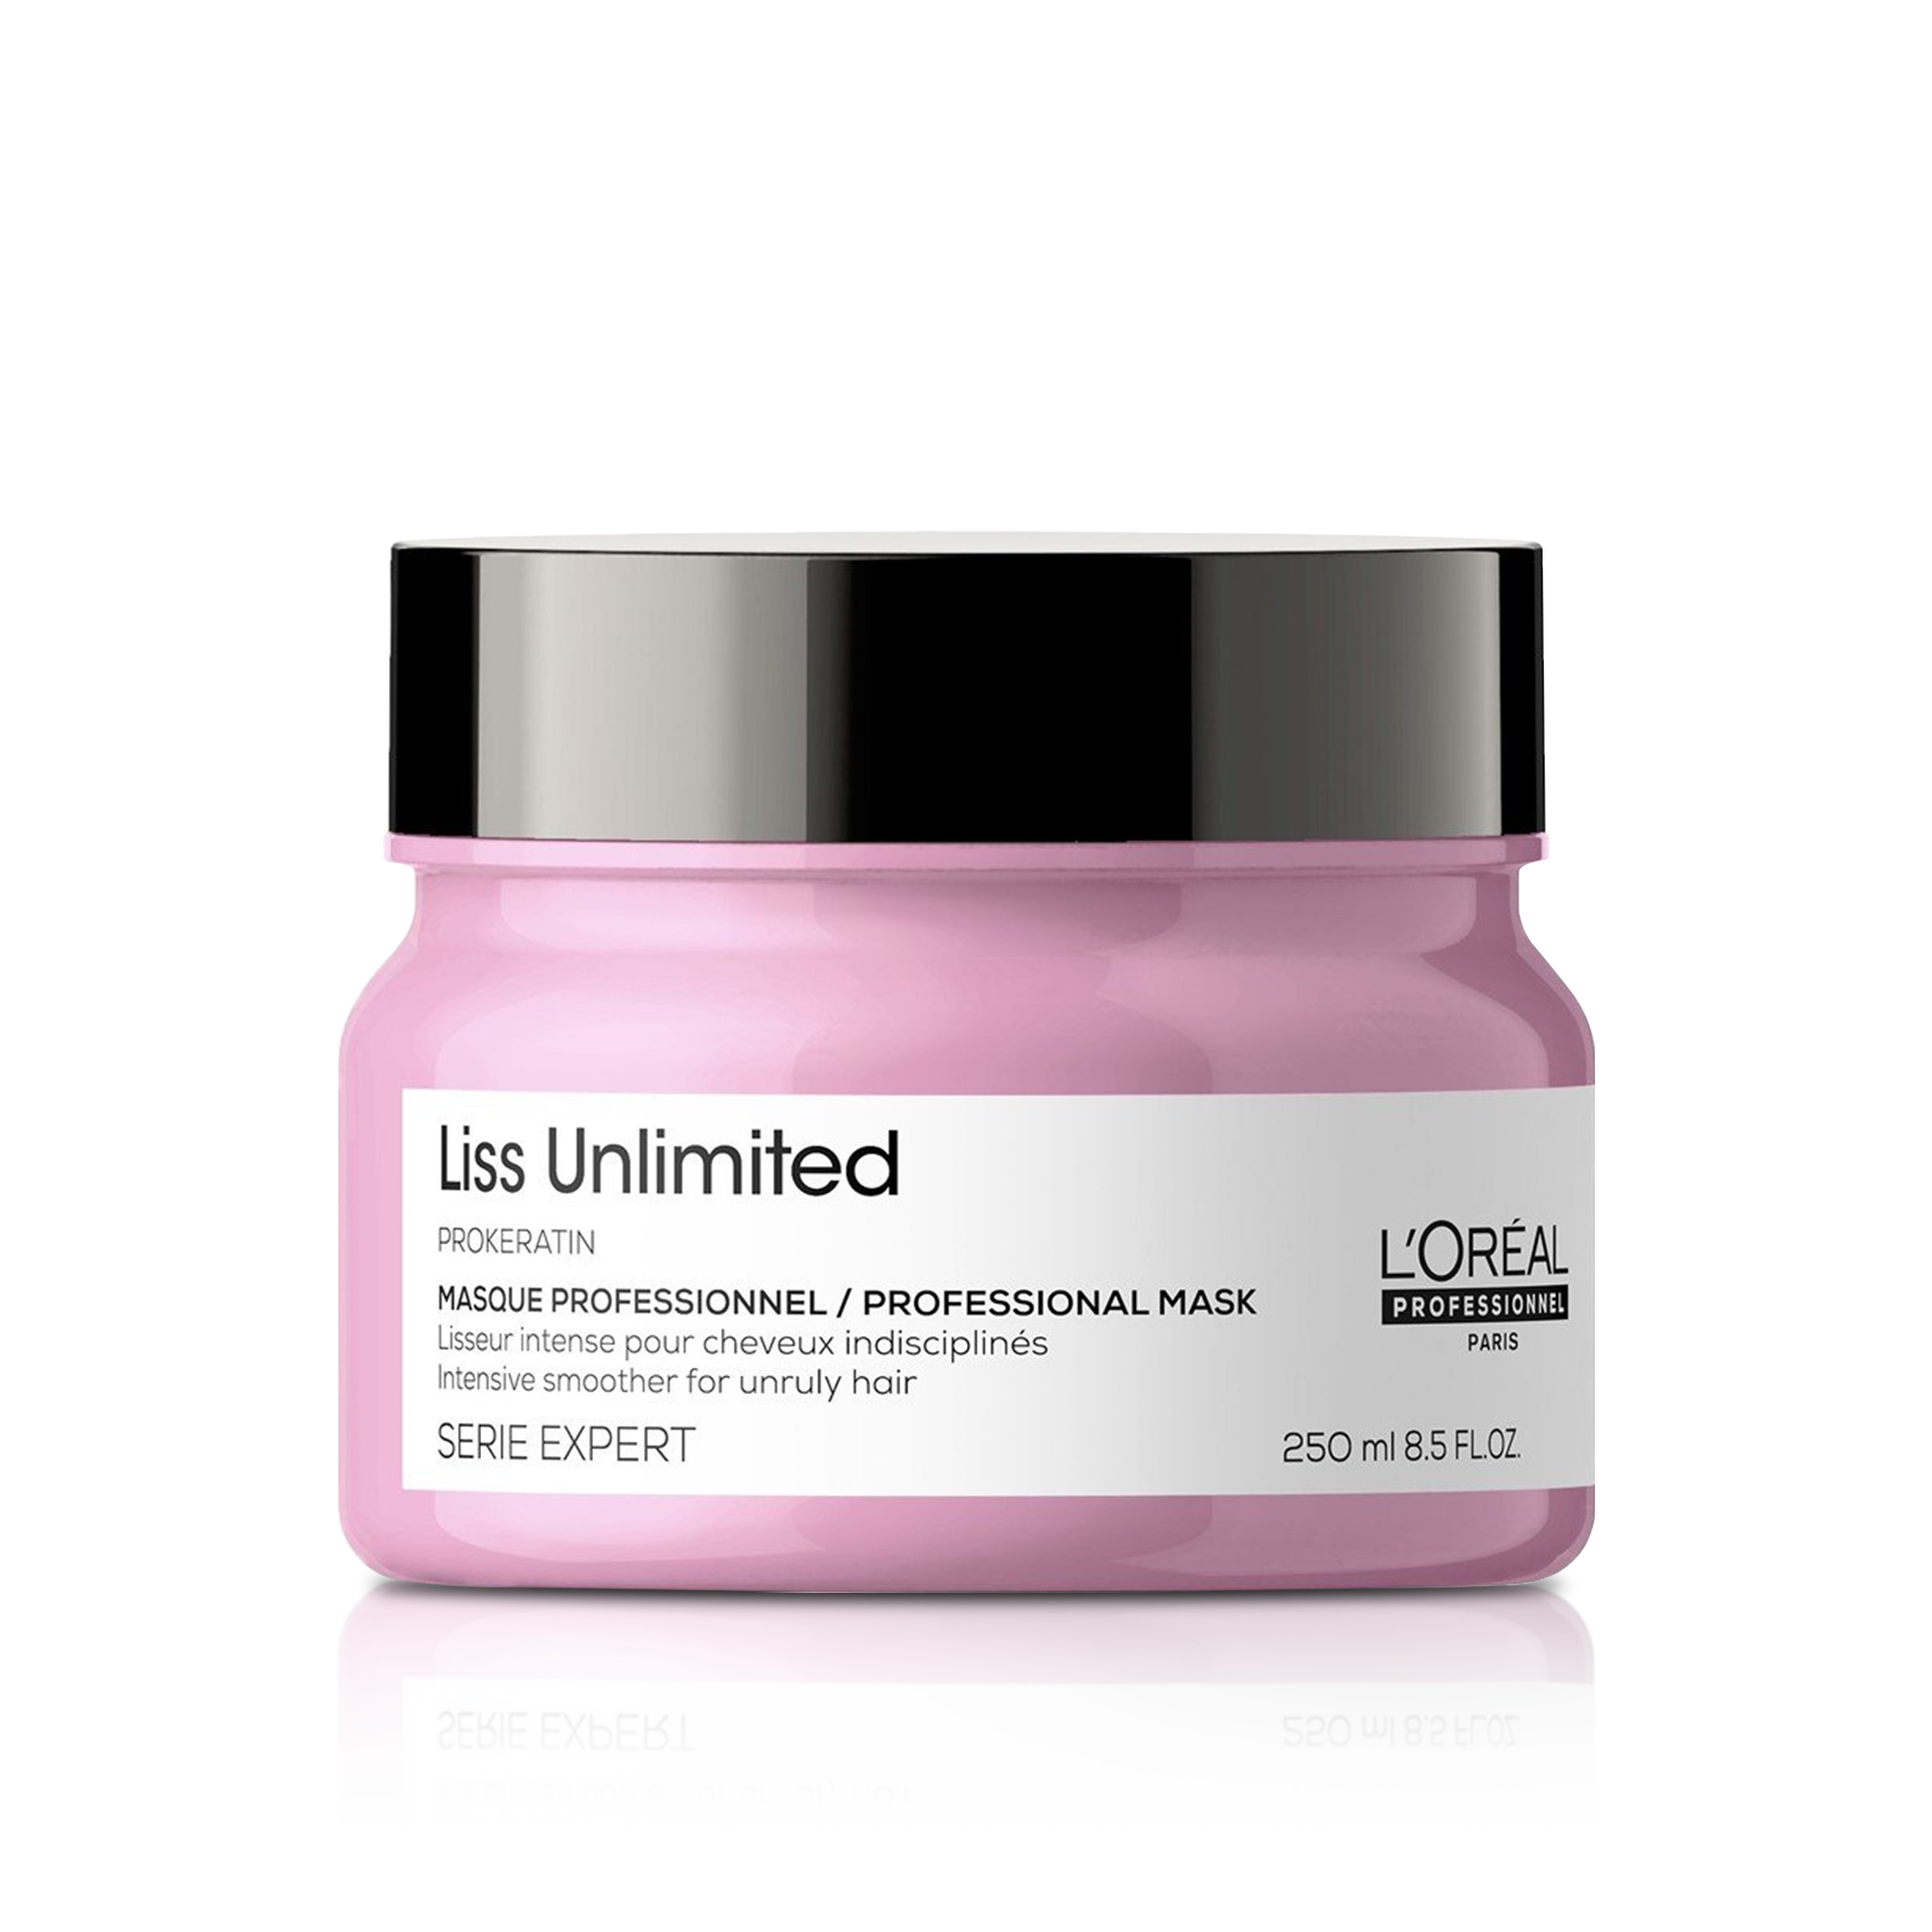 Liss Unlimited Prokeratin Professional Masque